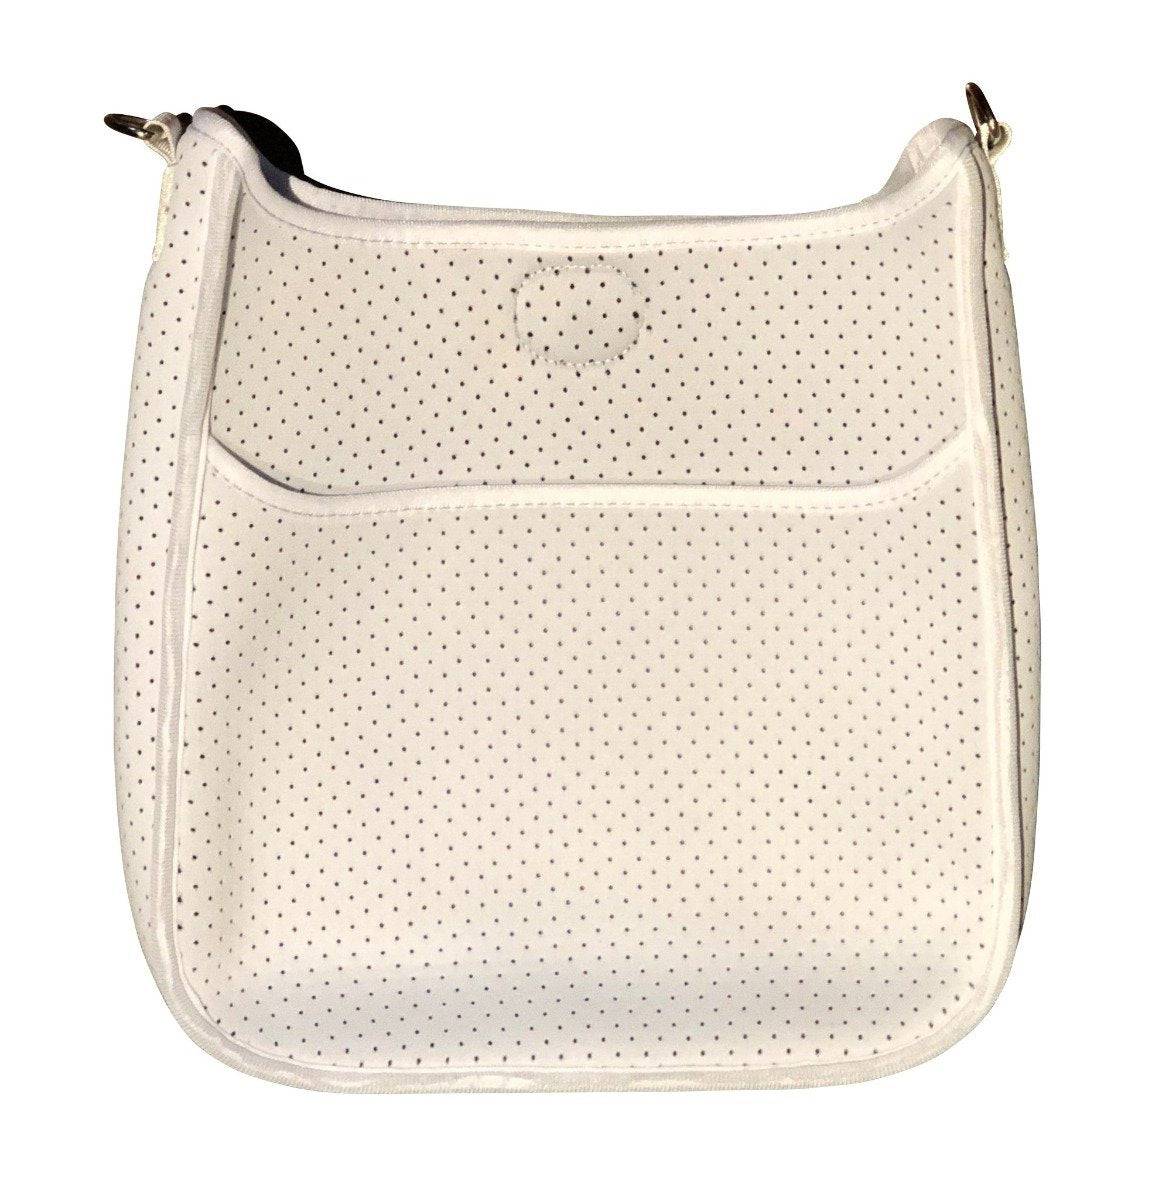 White Perforated Neoprene Messenger Bag - Twinkle Twinkle Little One